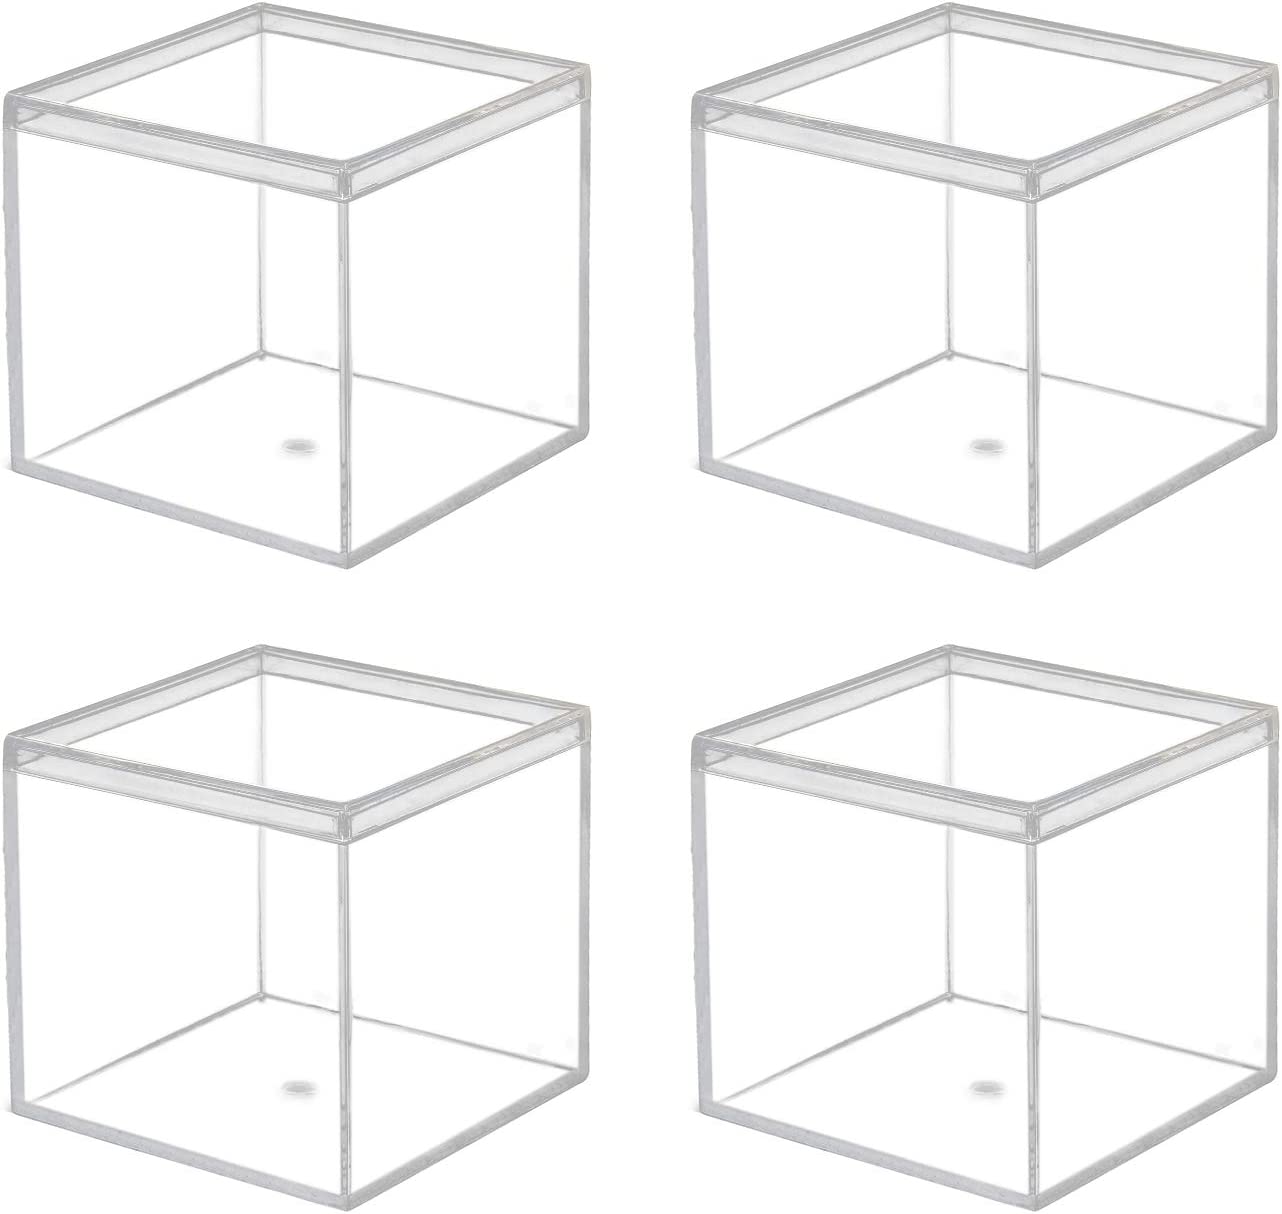  dedoot Clear Acrylic Boxes with Lid, 4 Pack 3.3x3.3x3